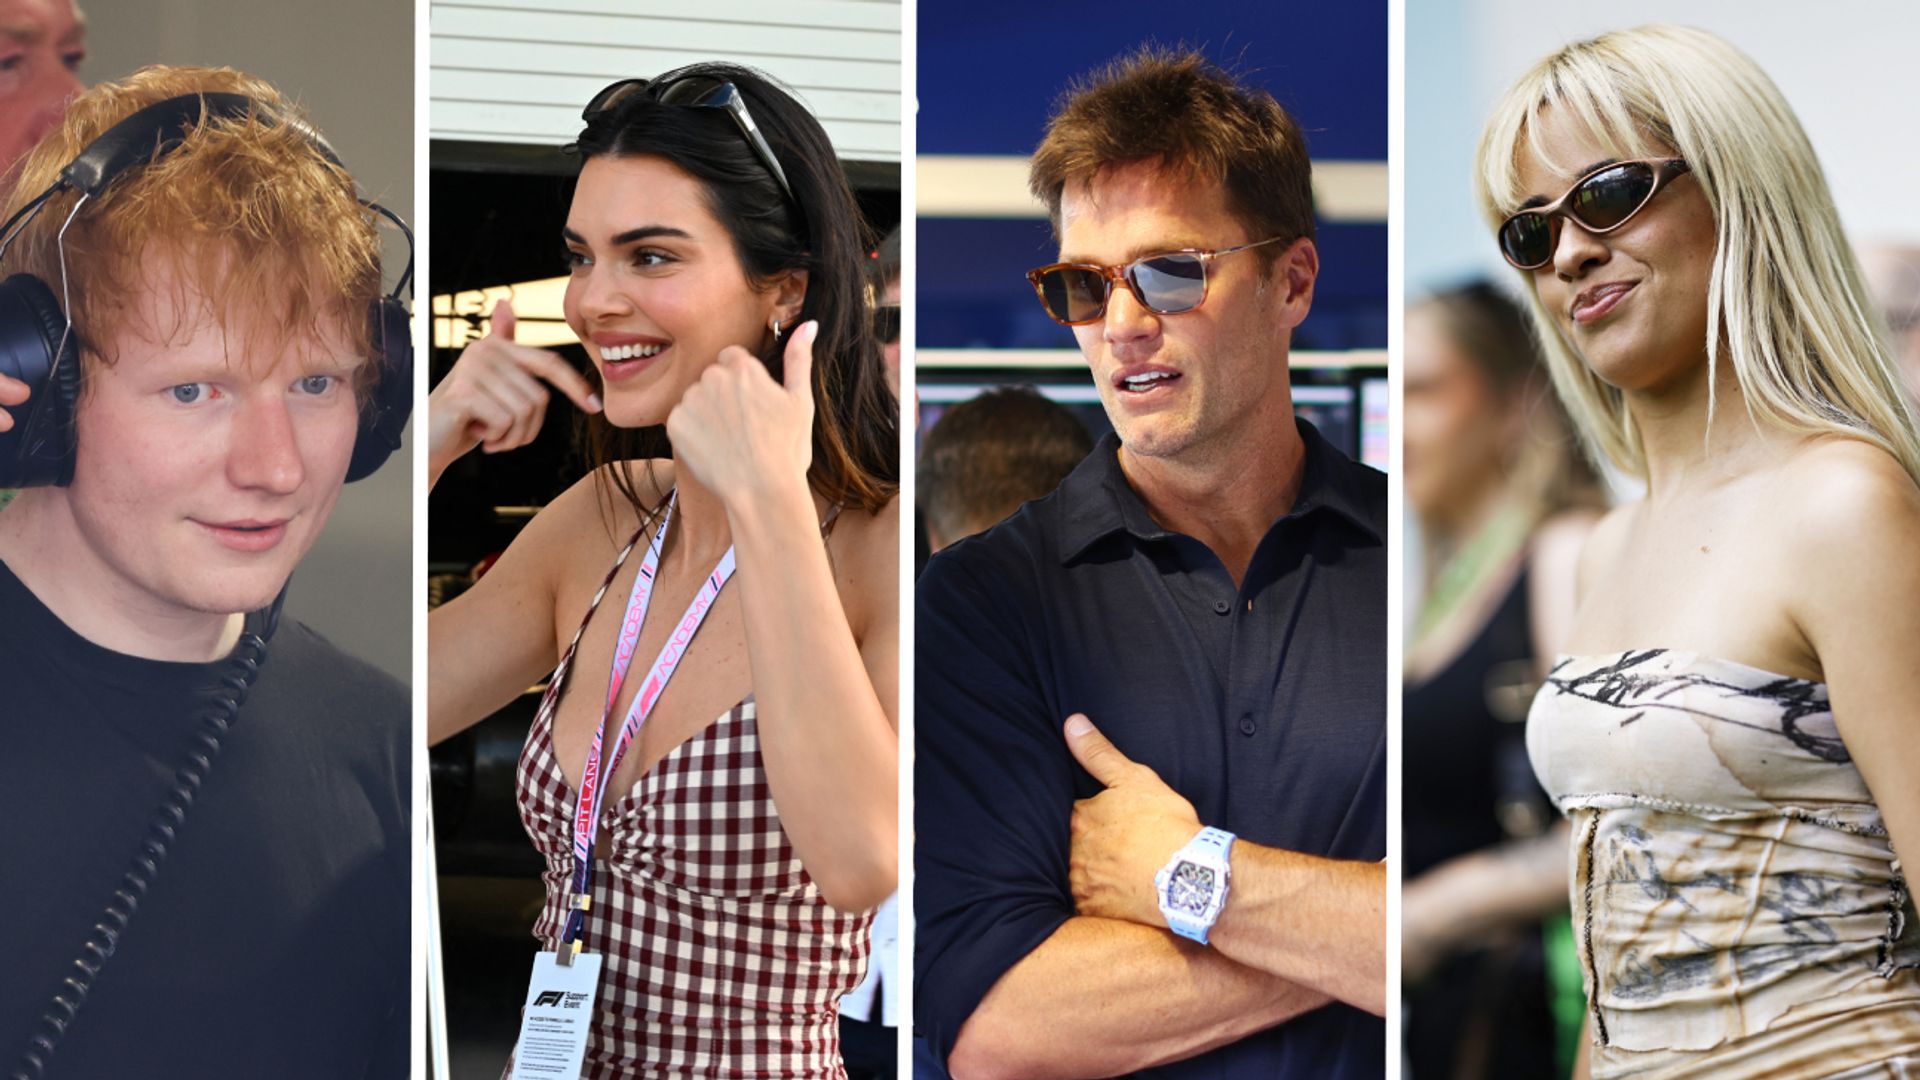 Ed Sheeran, Kendall Jenner and Camila Cabello: All the celebs at the F1 Miami Grand Prix